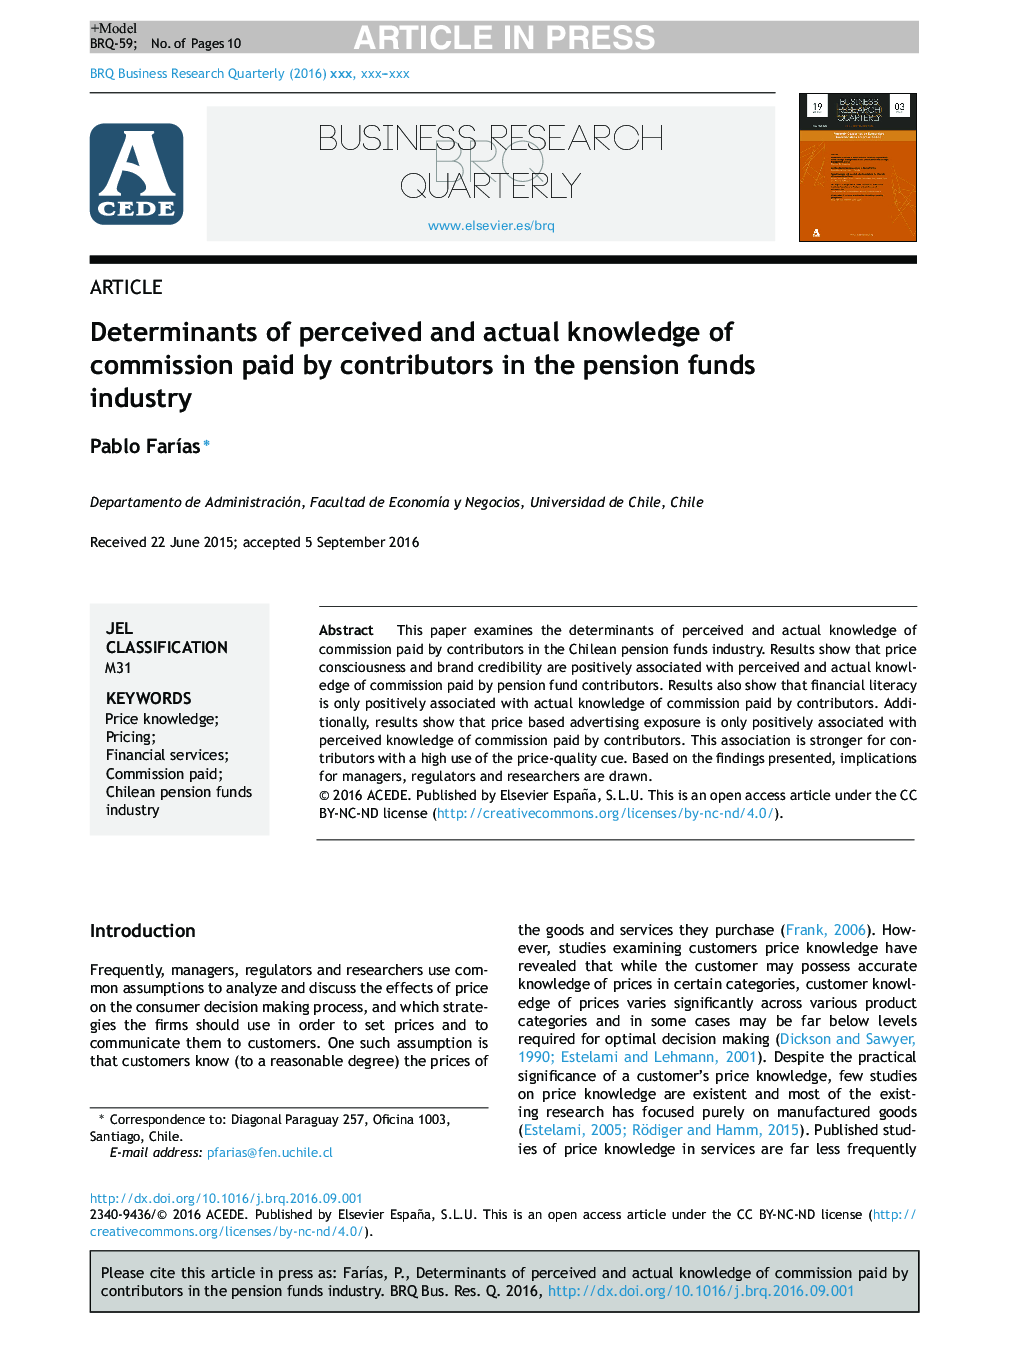 Determinants of perceived and actual knowledge of commission paid by contributors in the pension funds industry